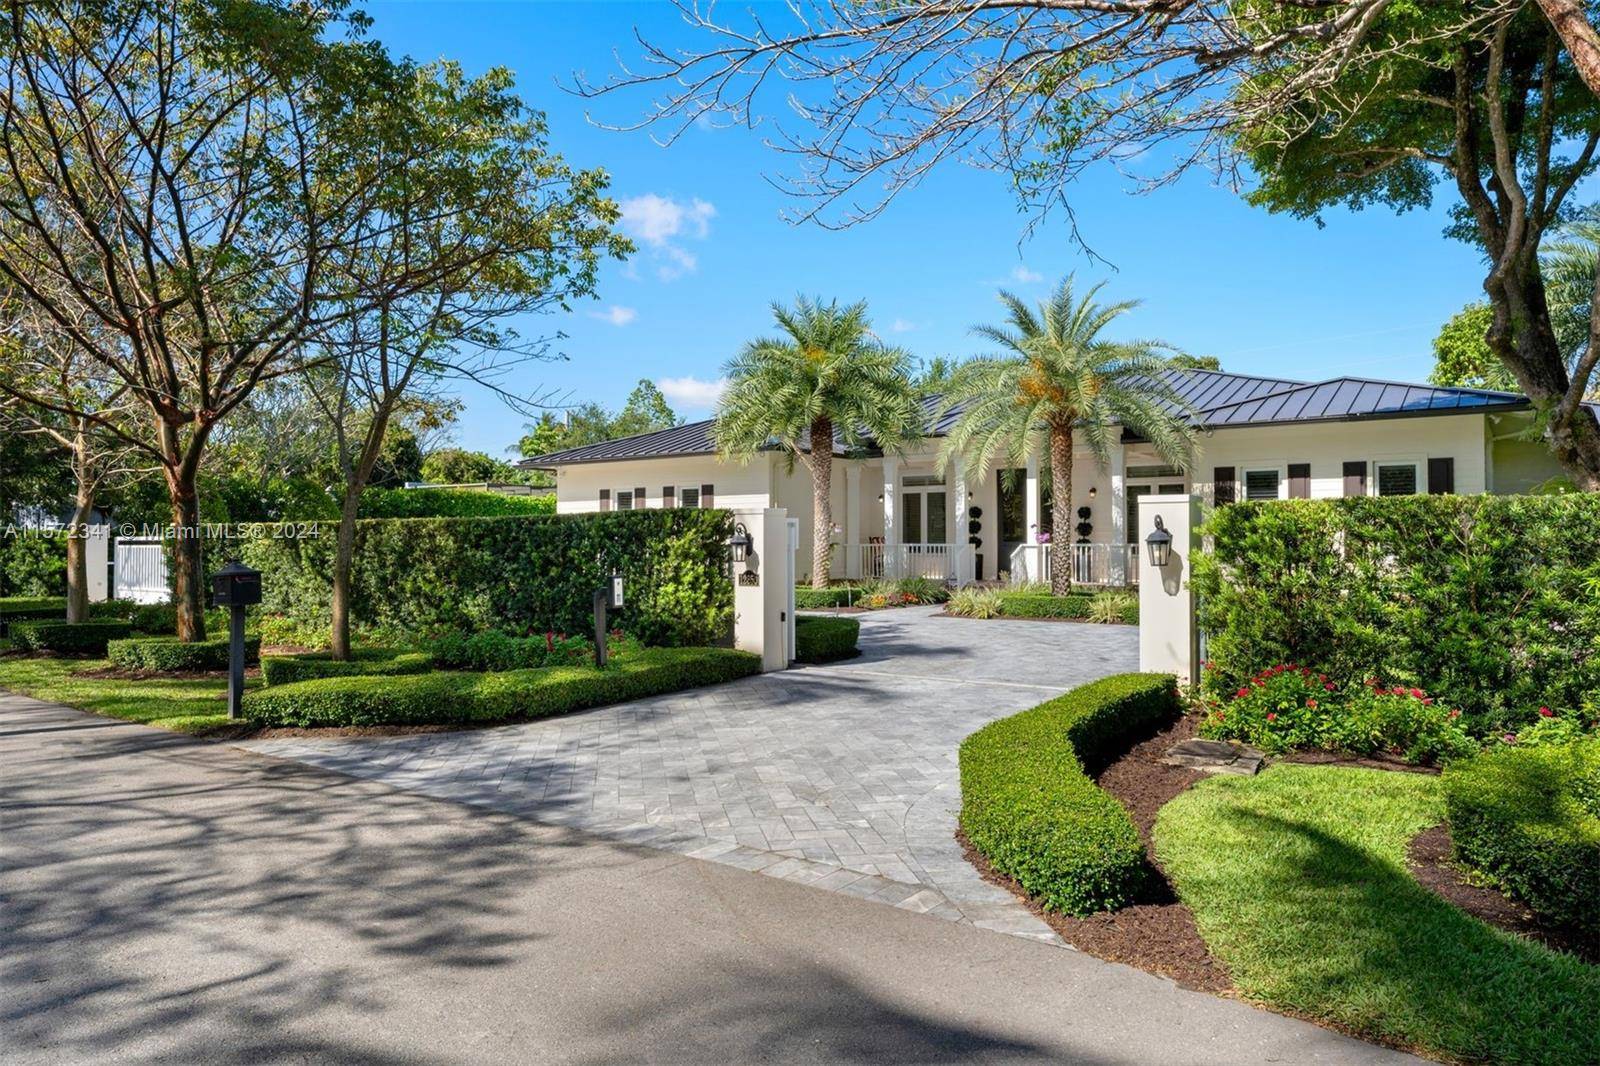 Built in 2019, this stunning 5, 001 SF, 4 BD, 4 BA home is on a sizable 24, 727 SF lot in a highly sought after Pinecrest neighborhood.